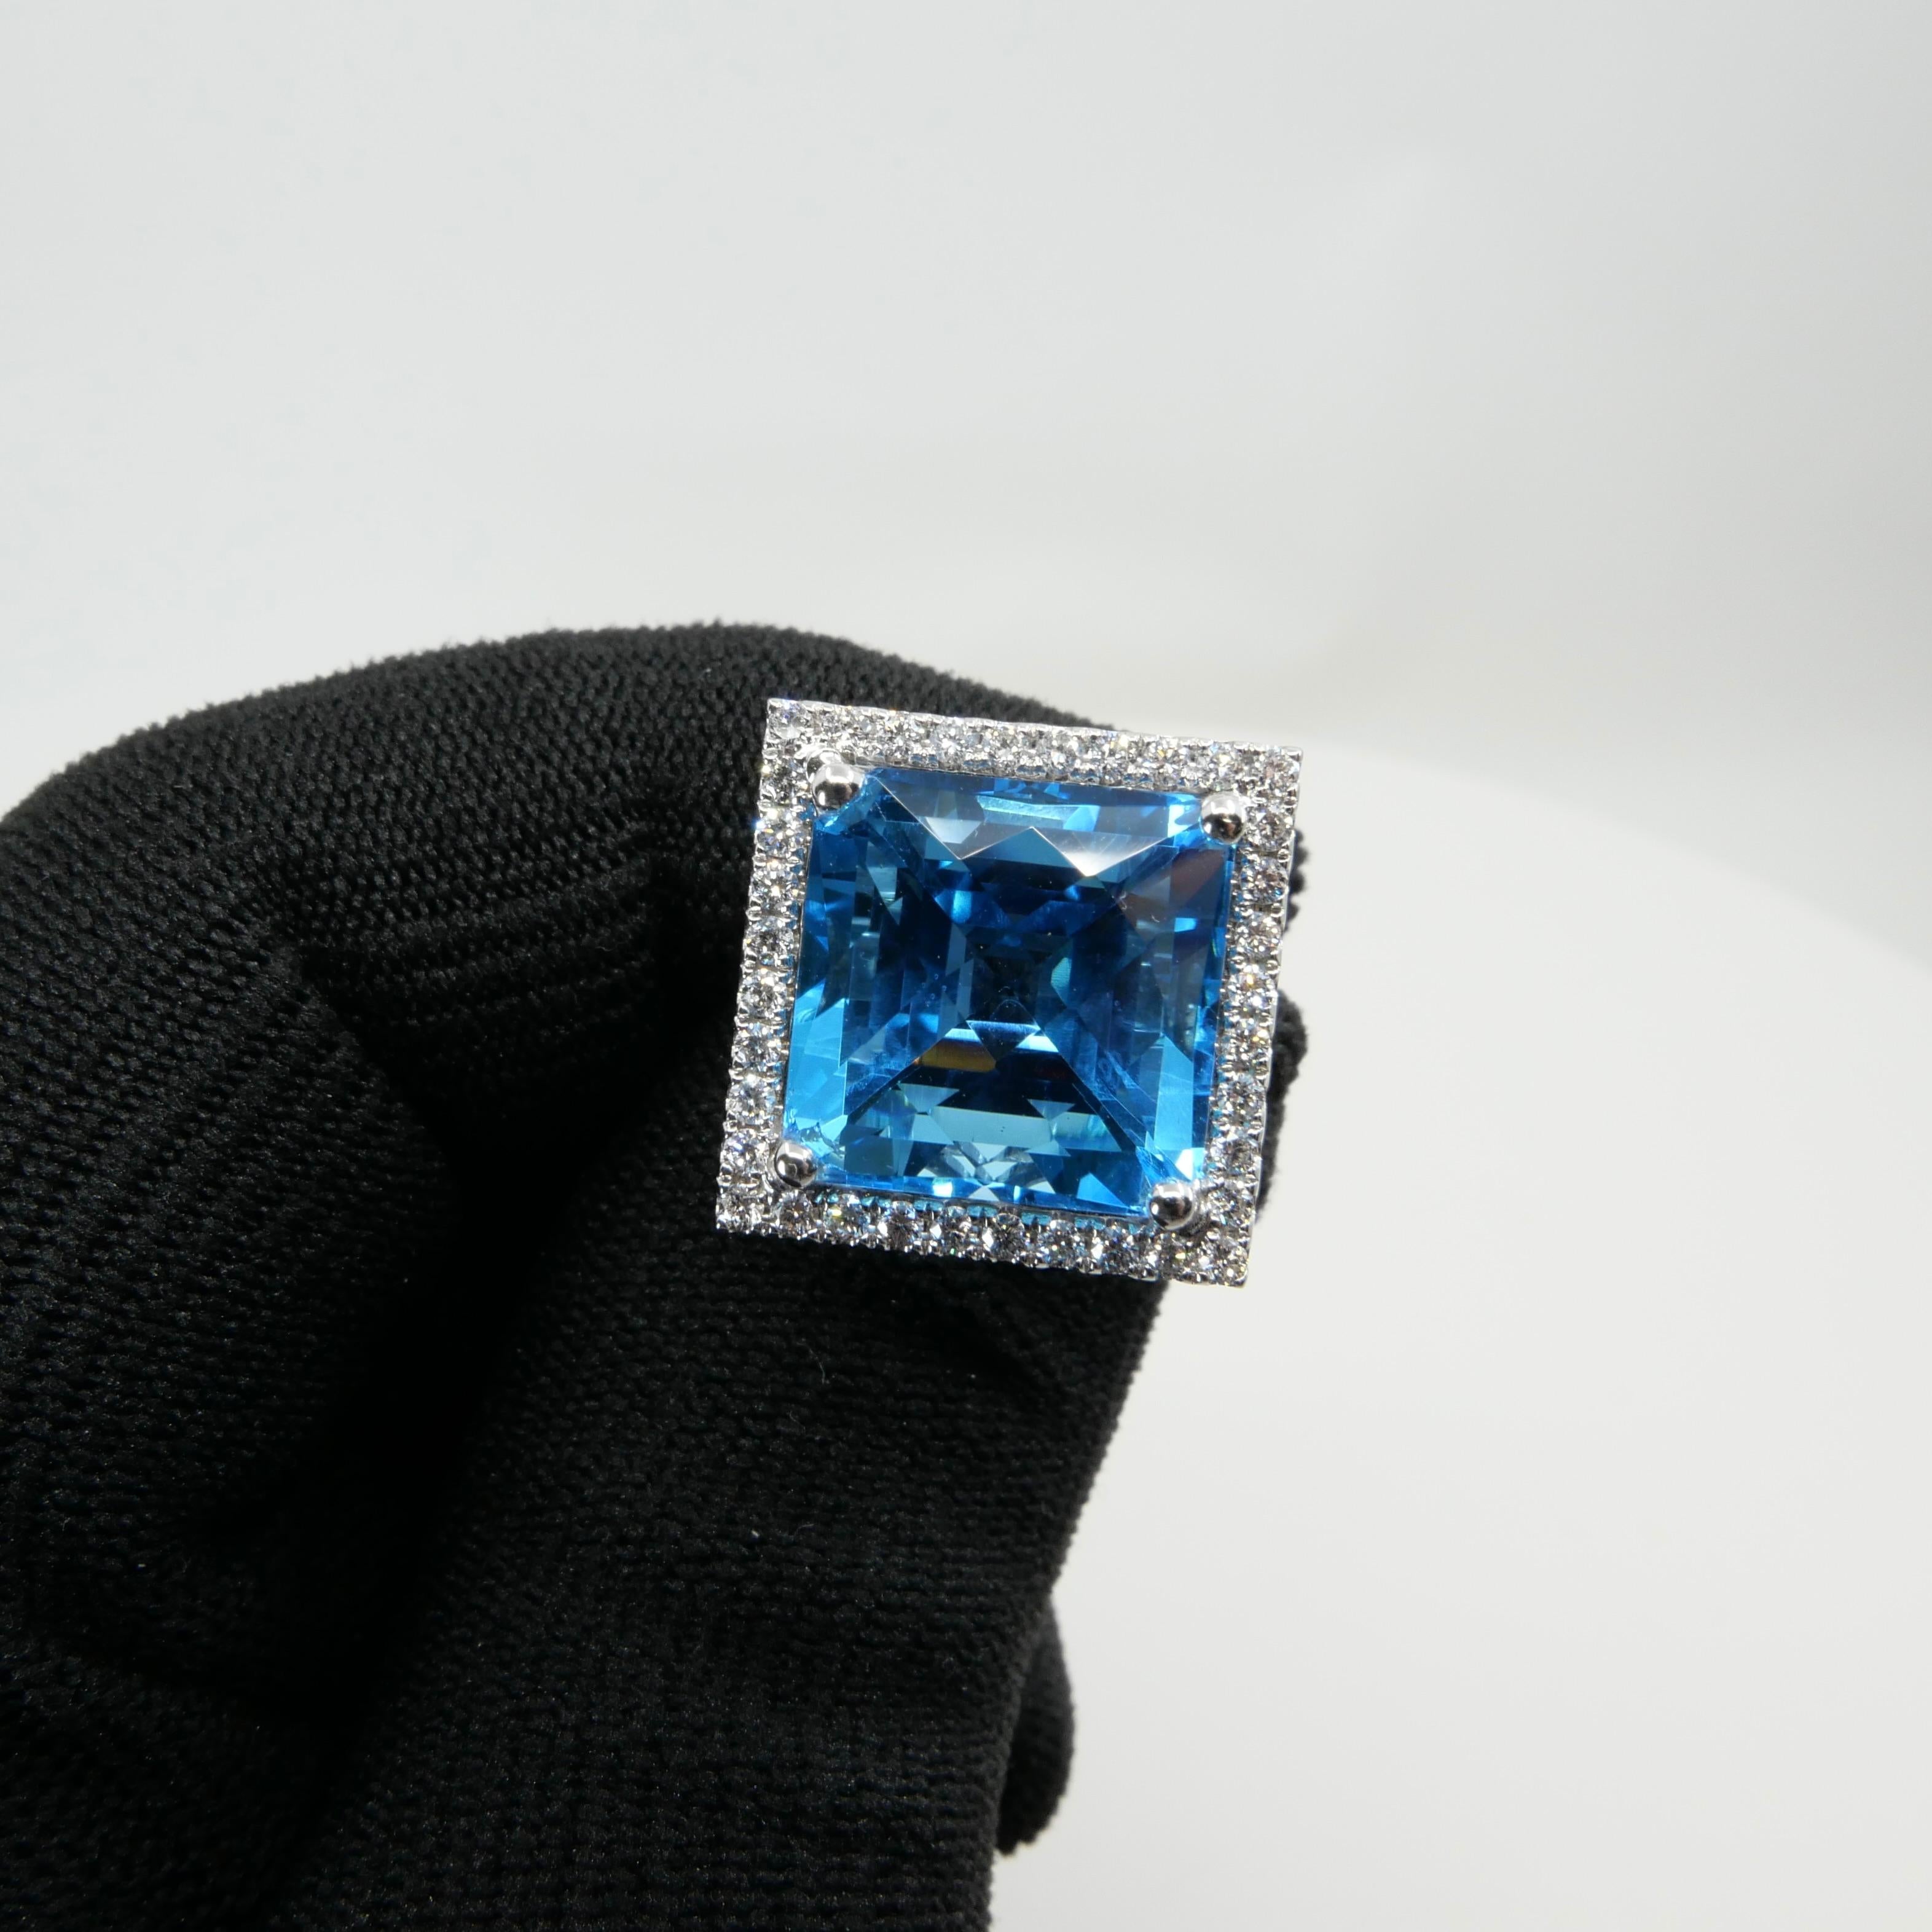 Women's  13 Cts checker Square Cut Blue Topaz & Diamond Cocktail Ring. Big Statement. For Sale